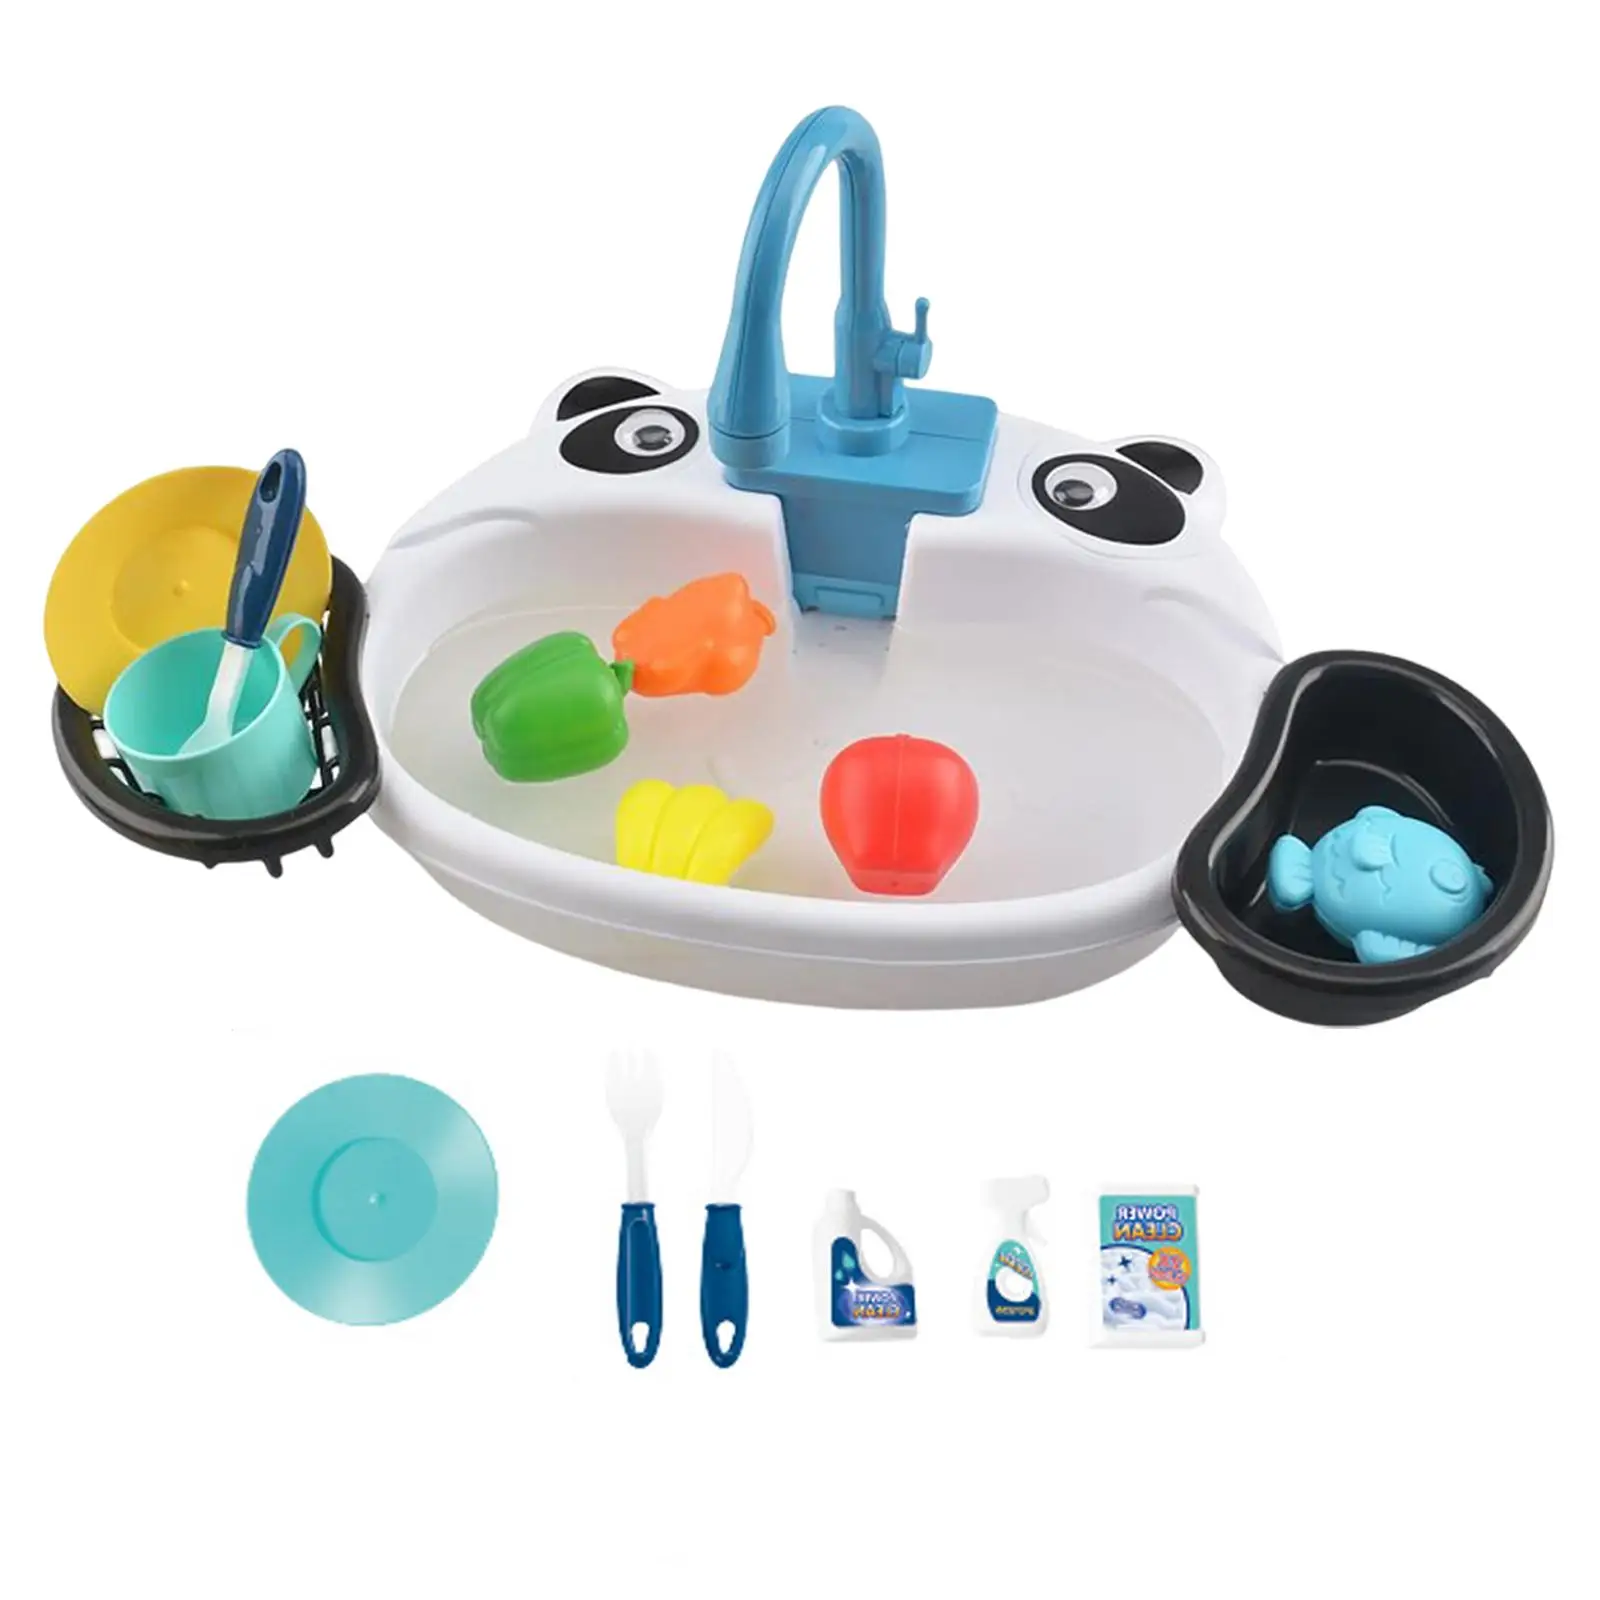 Play Sink Toys with Running Water Play Set Educational Gifts Wash up Automatic Water Cycle System Simulated for Role Play Gift